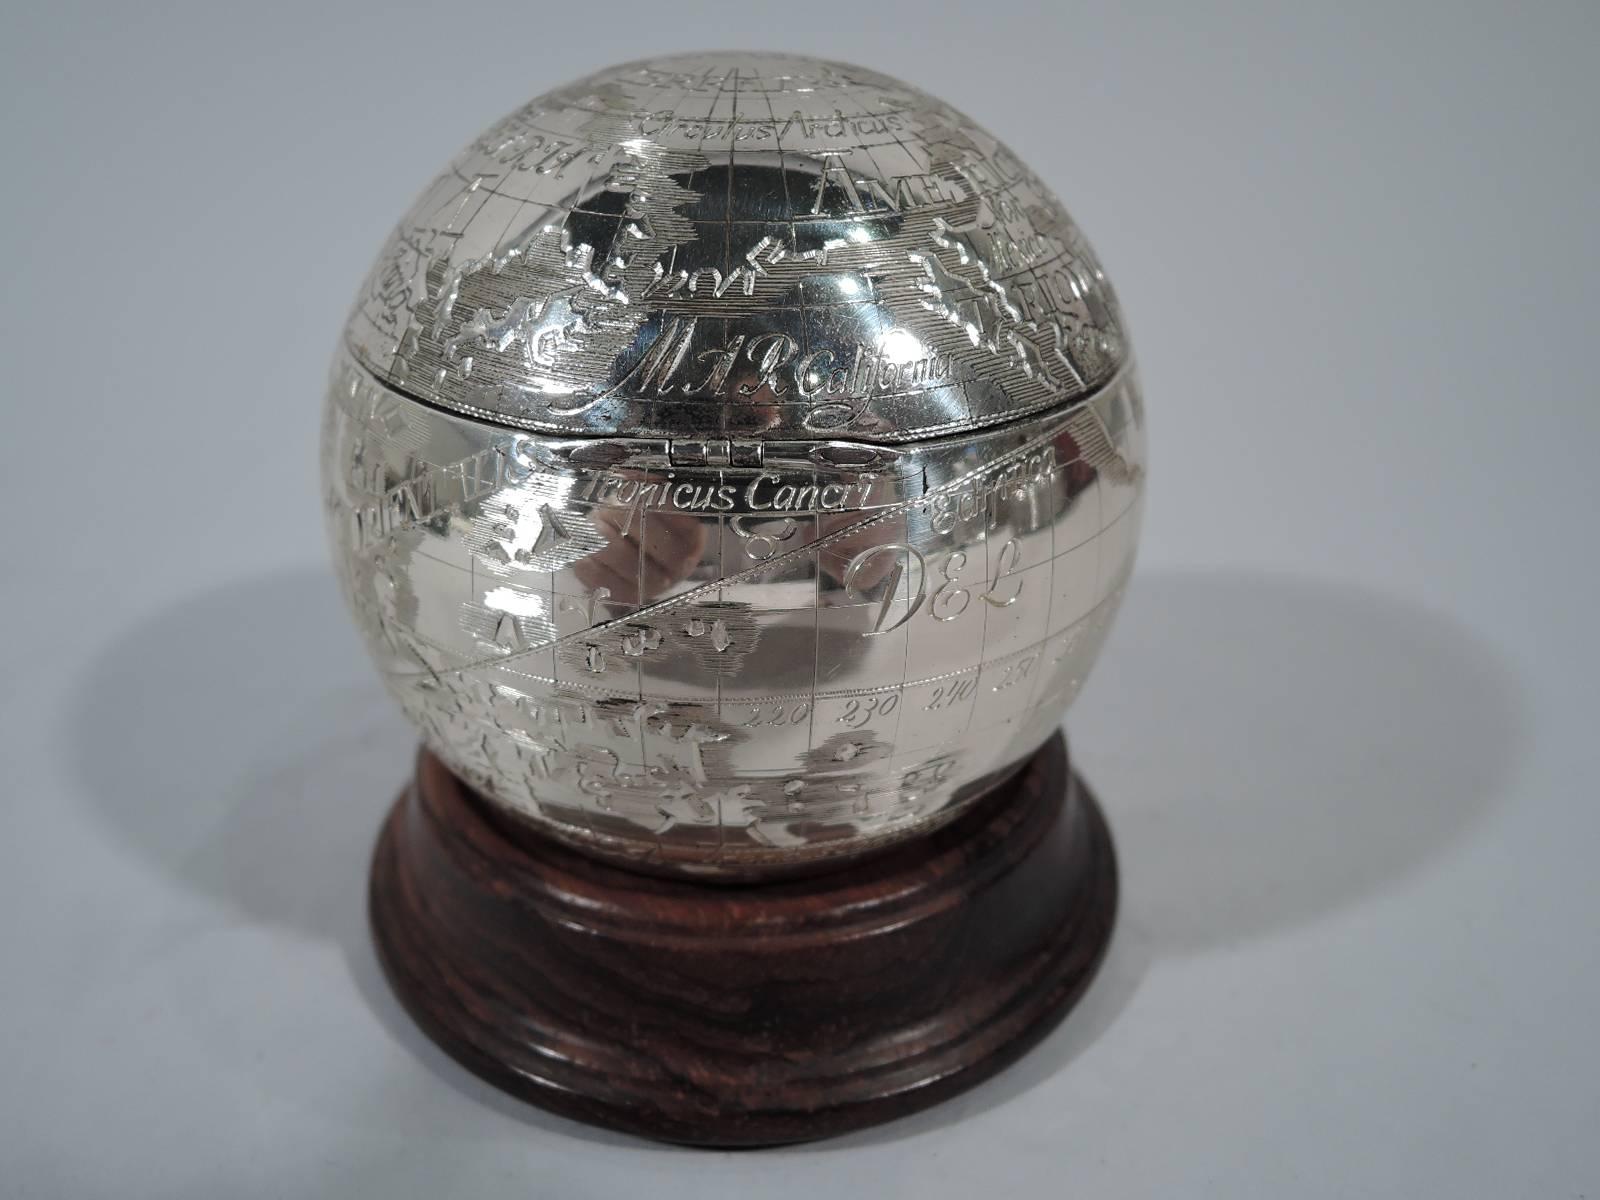 Sterling silver globe box. Retailed by Tiffany & Co. in New York. Never lose your cuff links again all while holding the world in the palm of your hand. Continents, oceans, and countries labeled in a variety of scripts and languages. Cover hinged